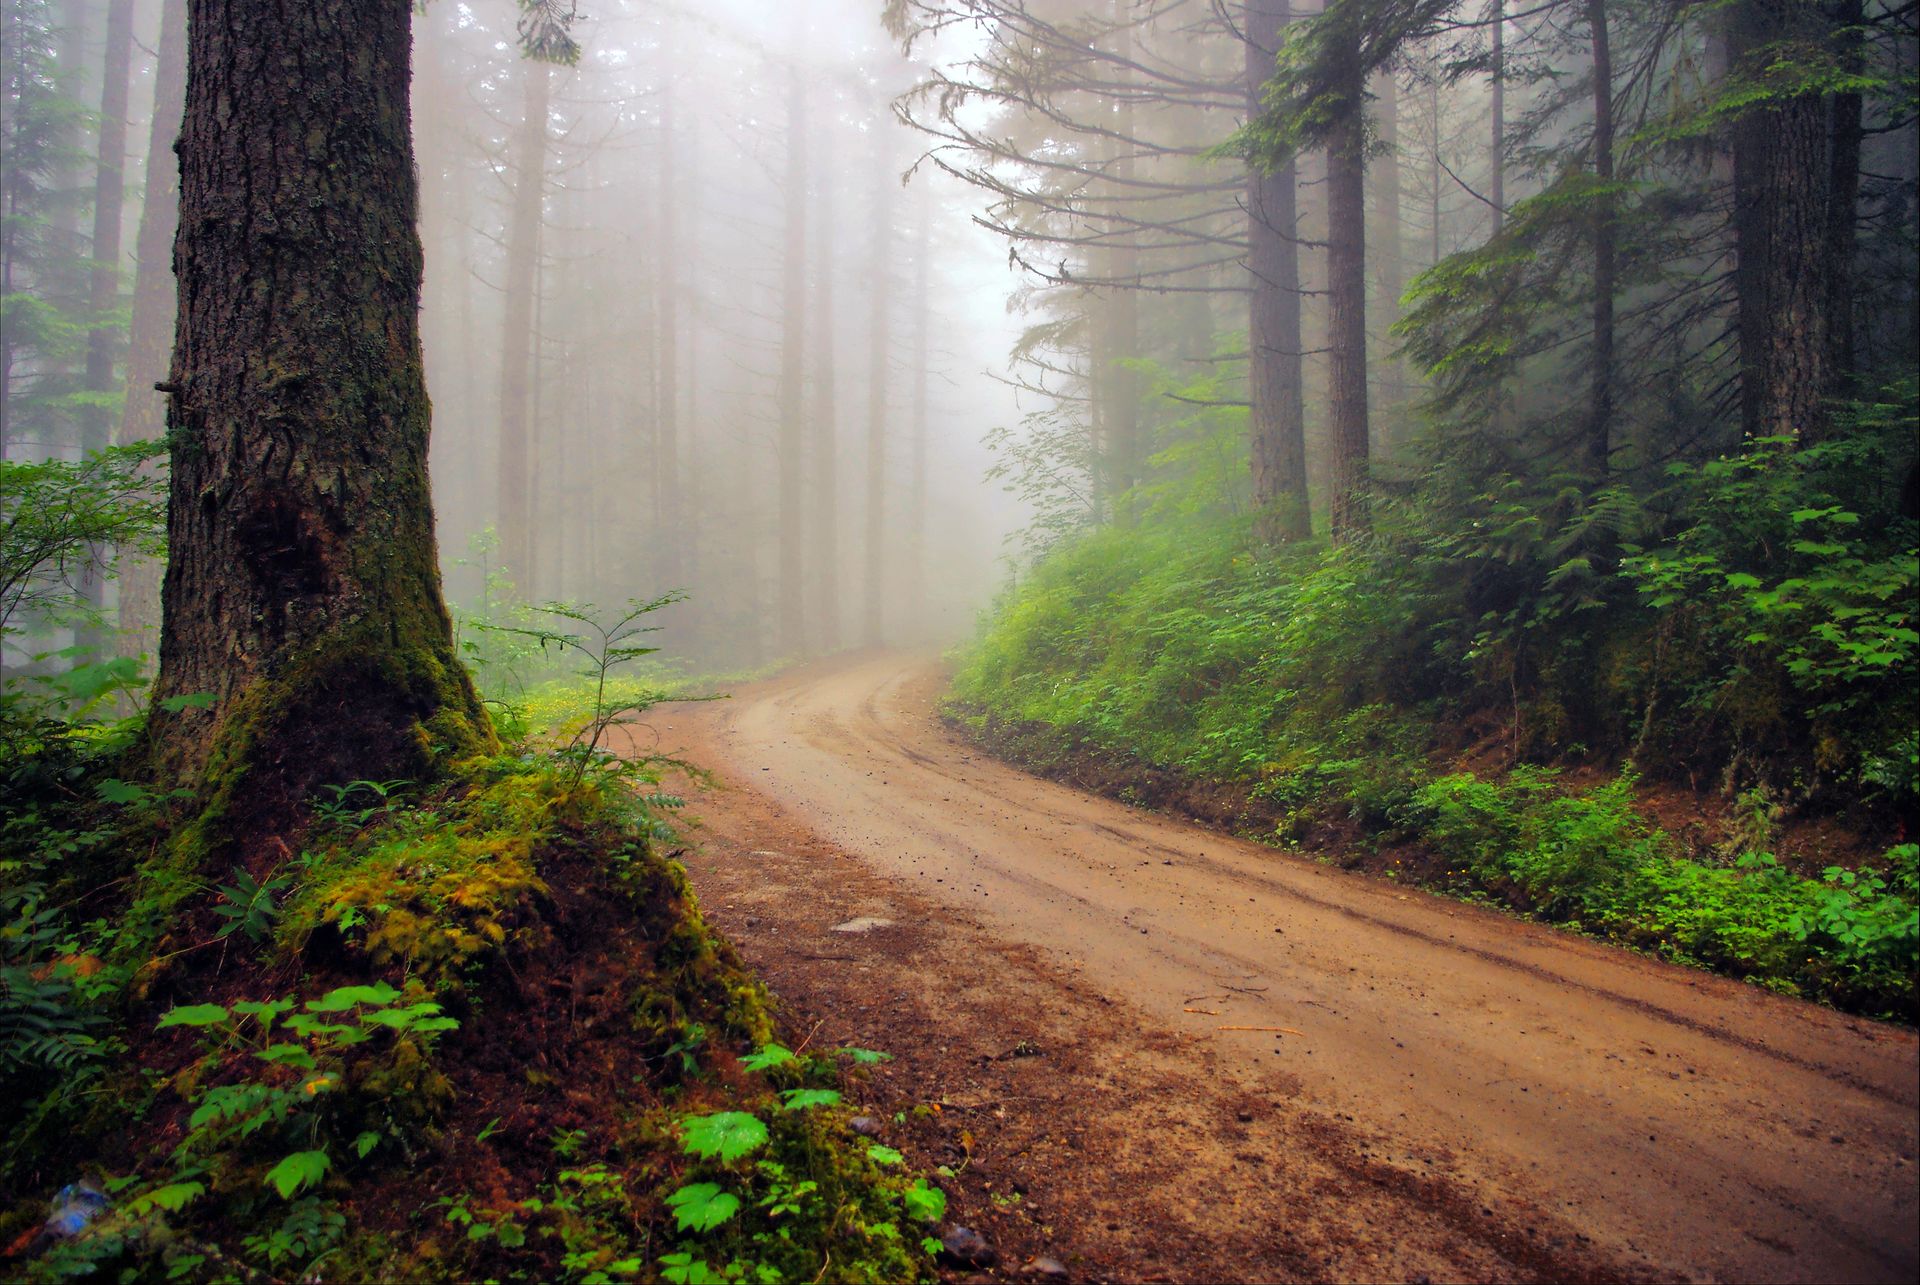 The Road In The Misty Forest Watch Hd Wallpaper Wildlife For The